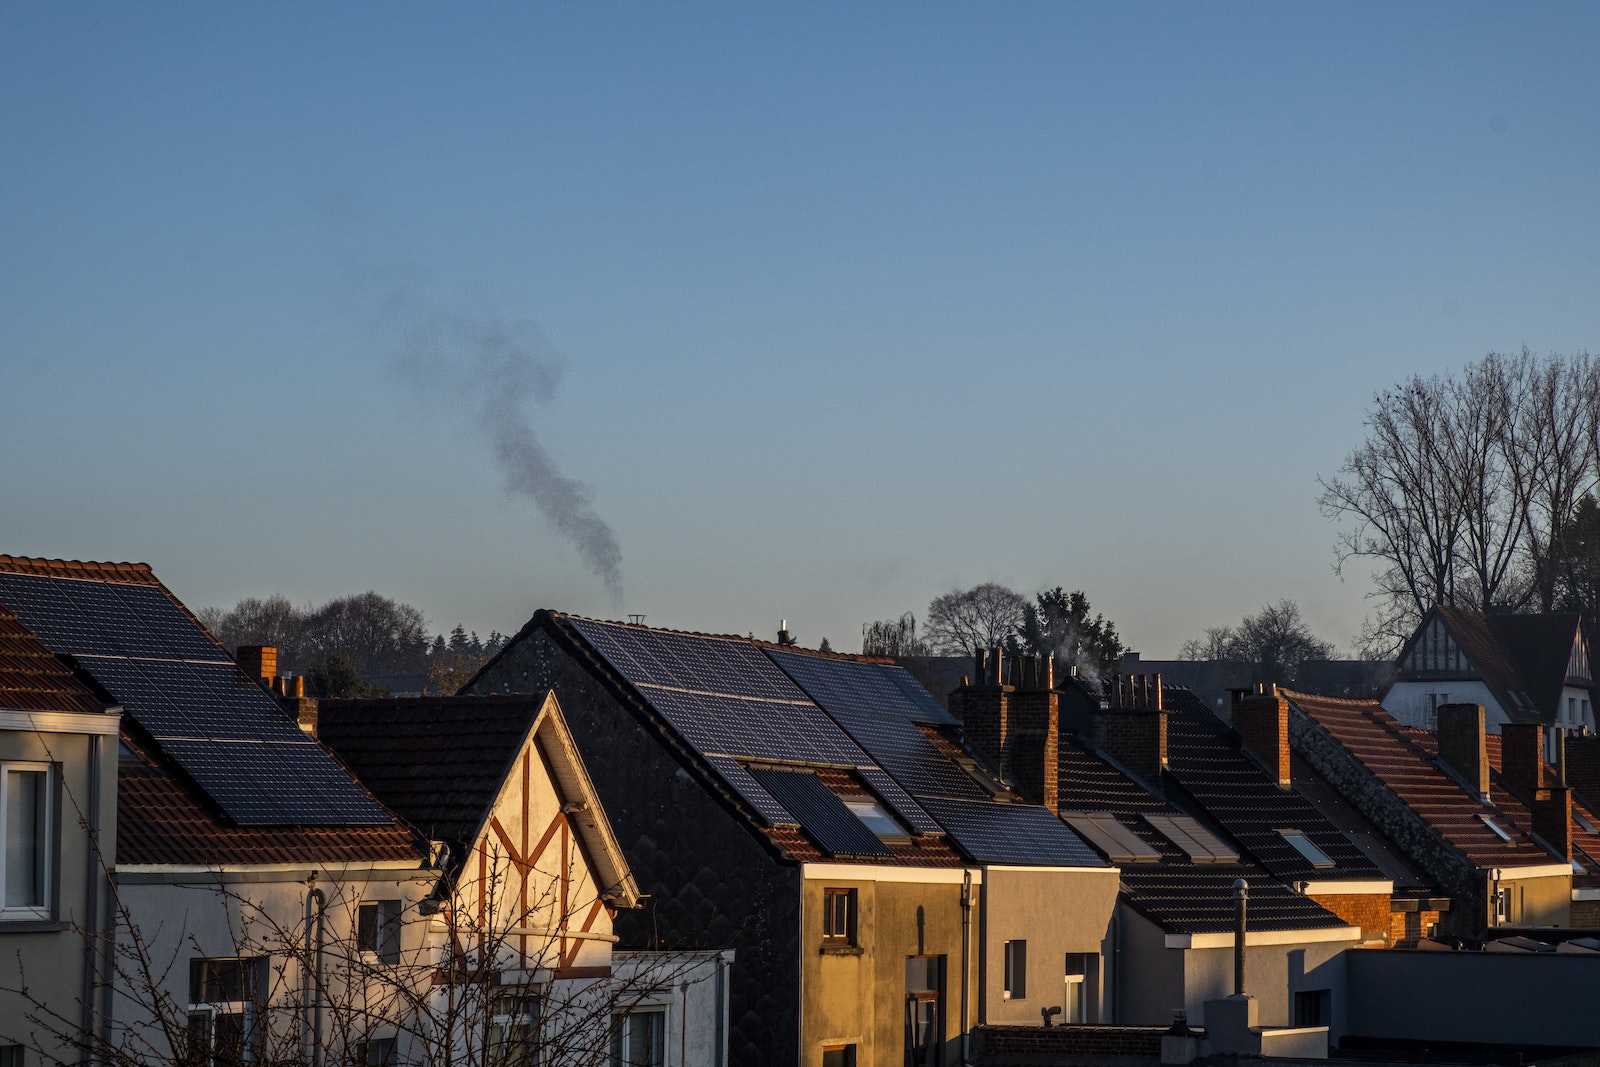 Houses with Solar Panels on Roofs